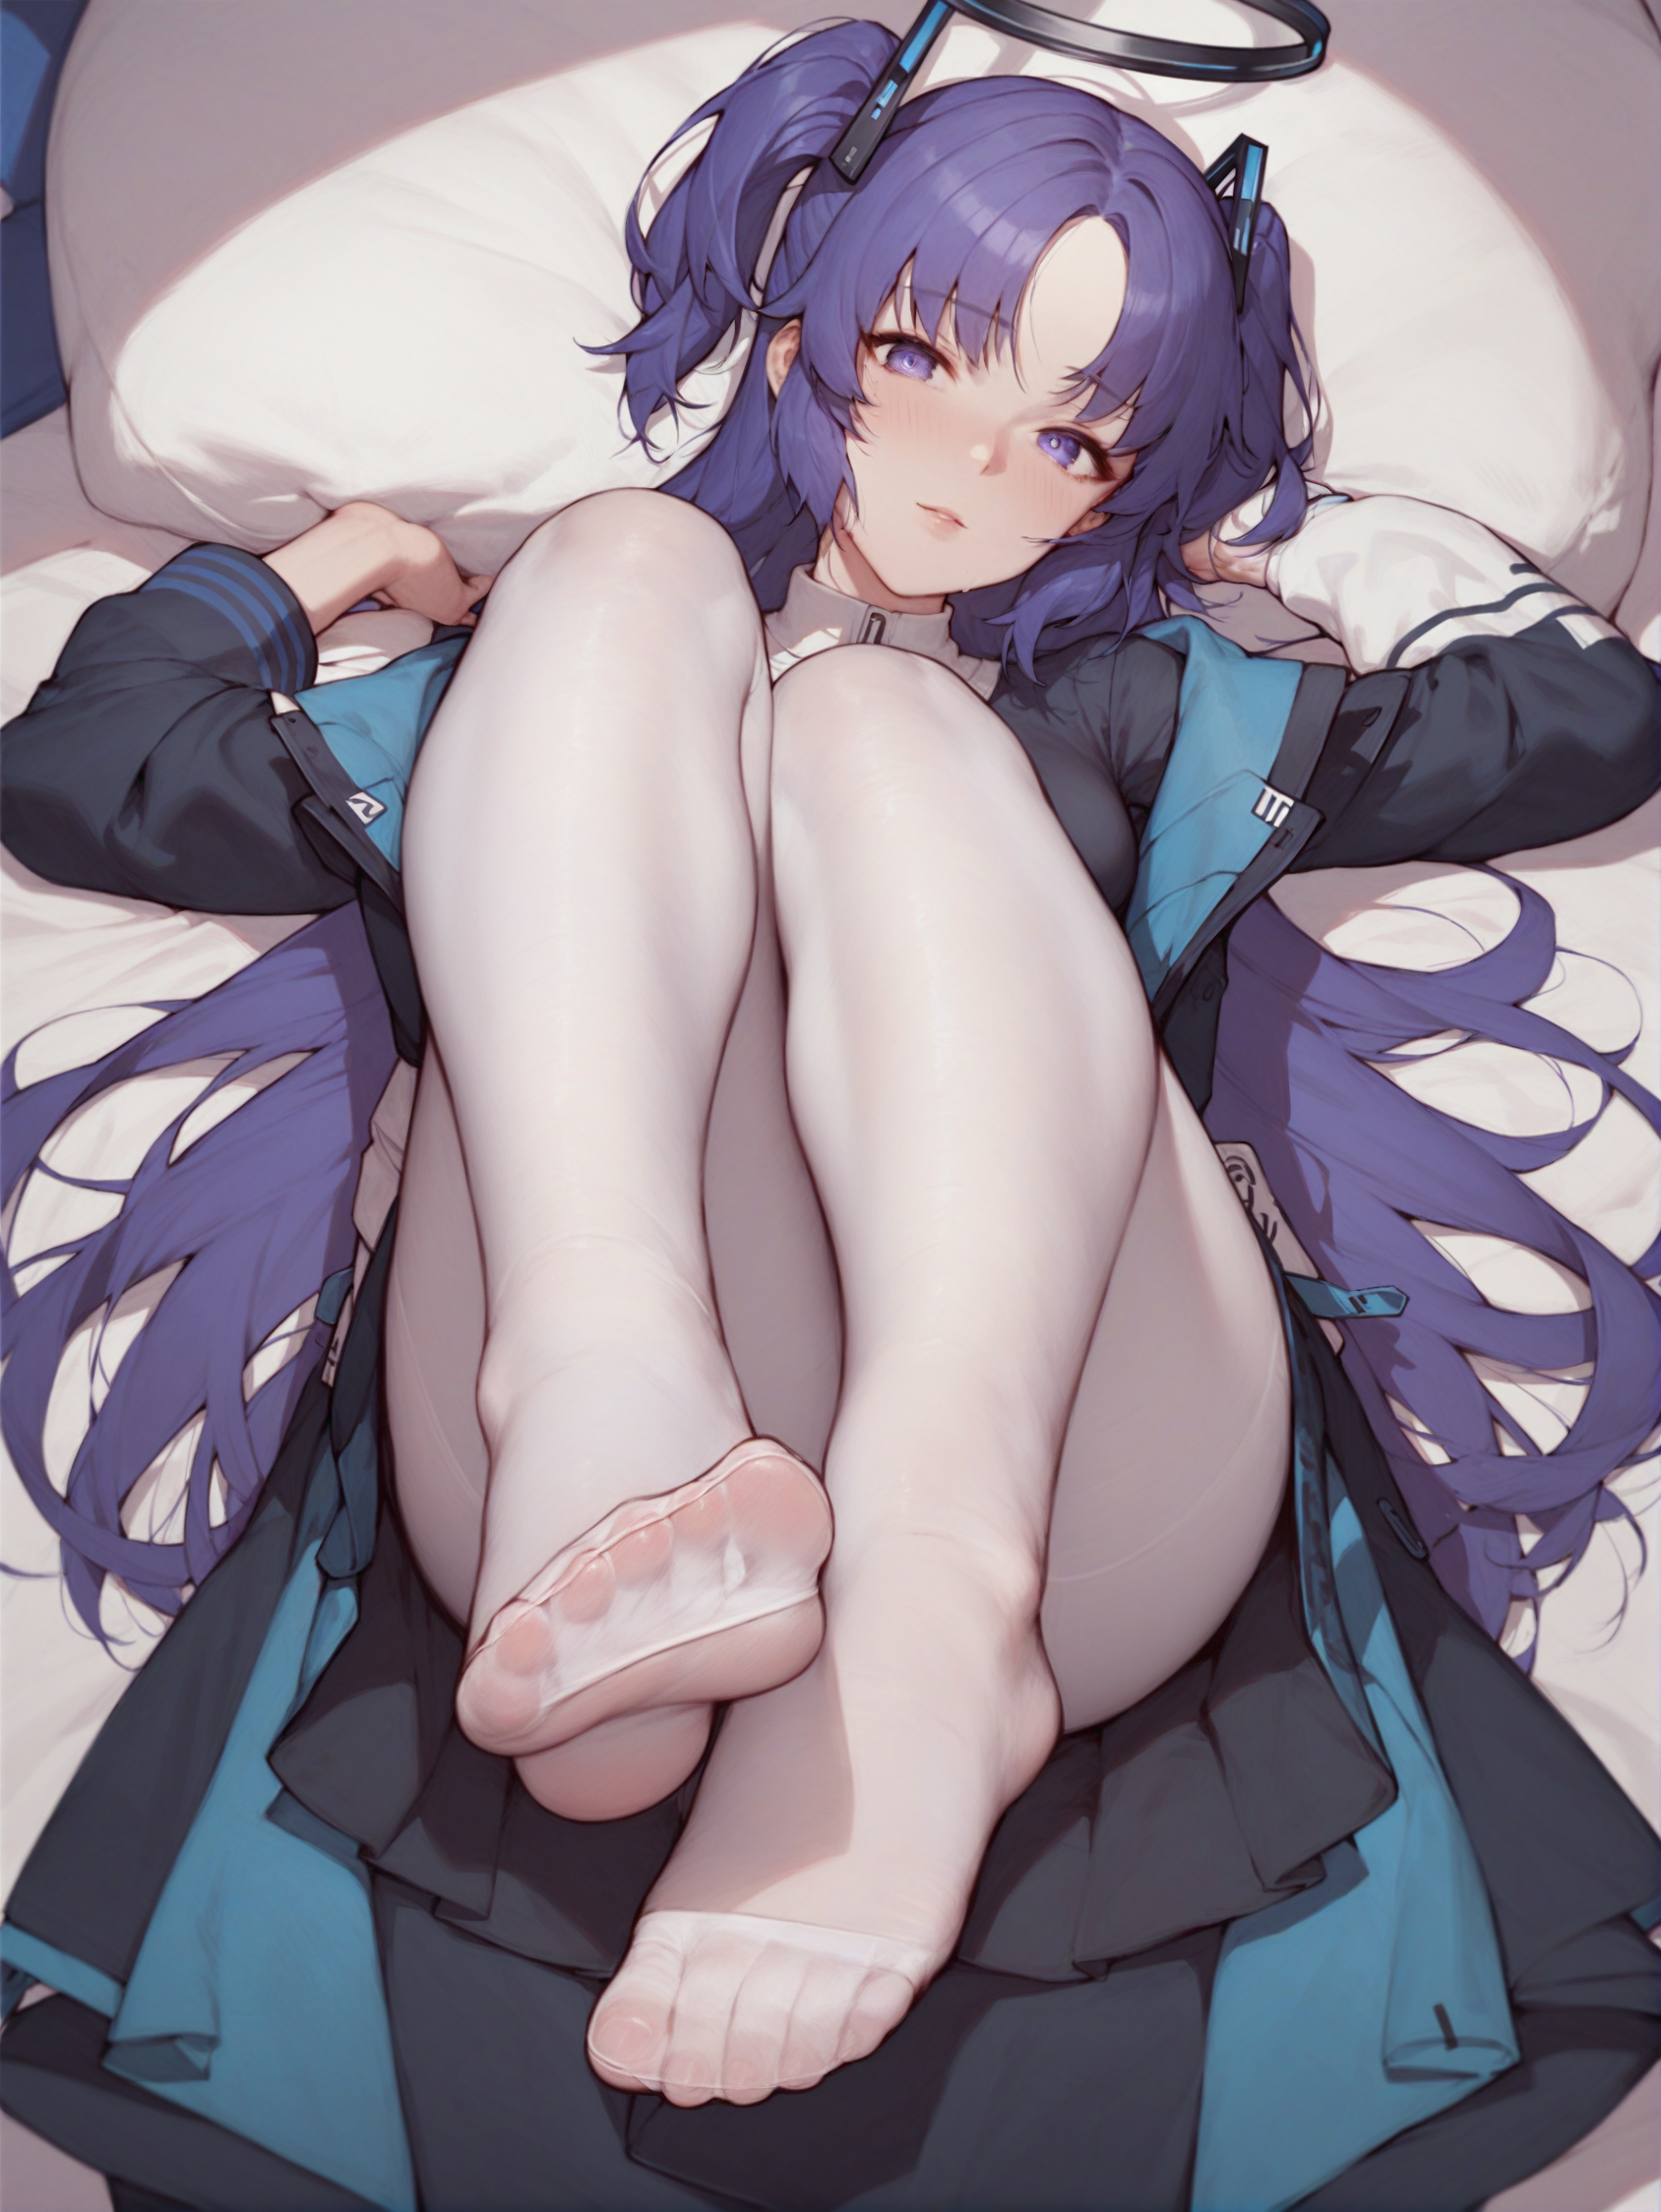 ecchi-content-delicious-feed-and-stockings-pt-2-v0-lmt1s0q0e08d1.png